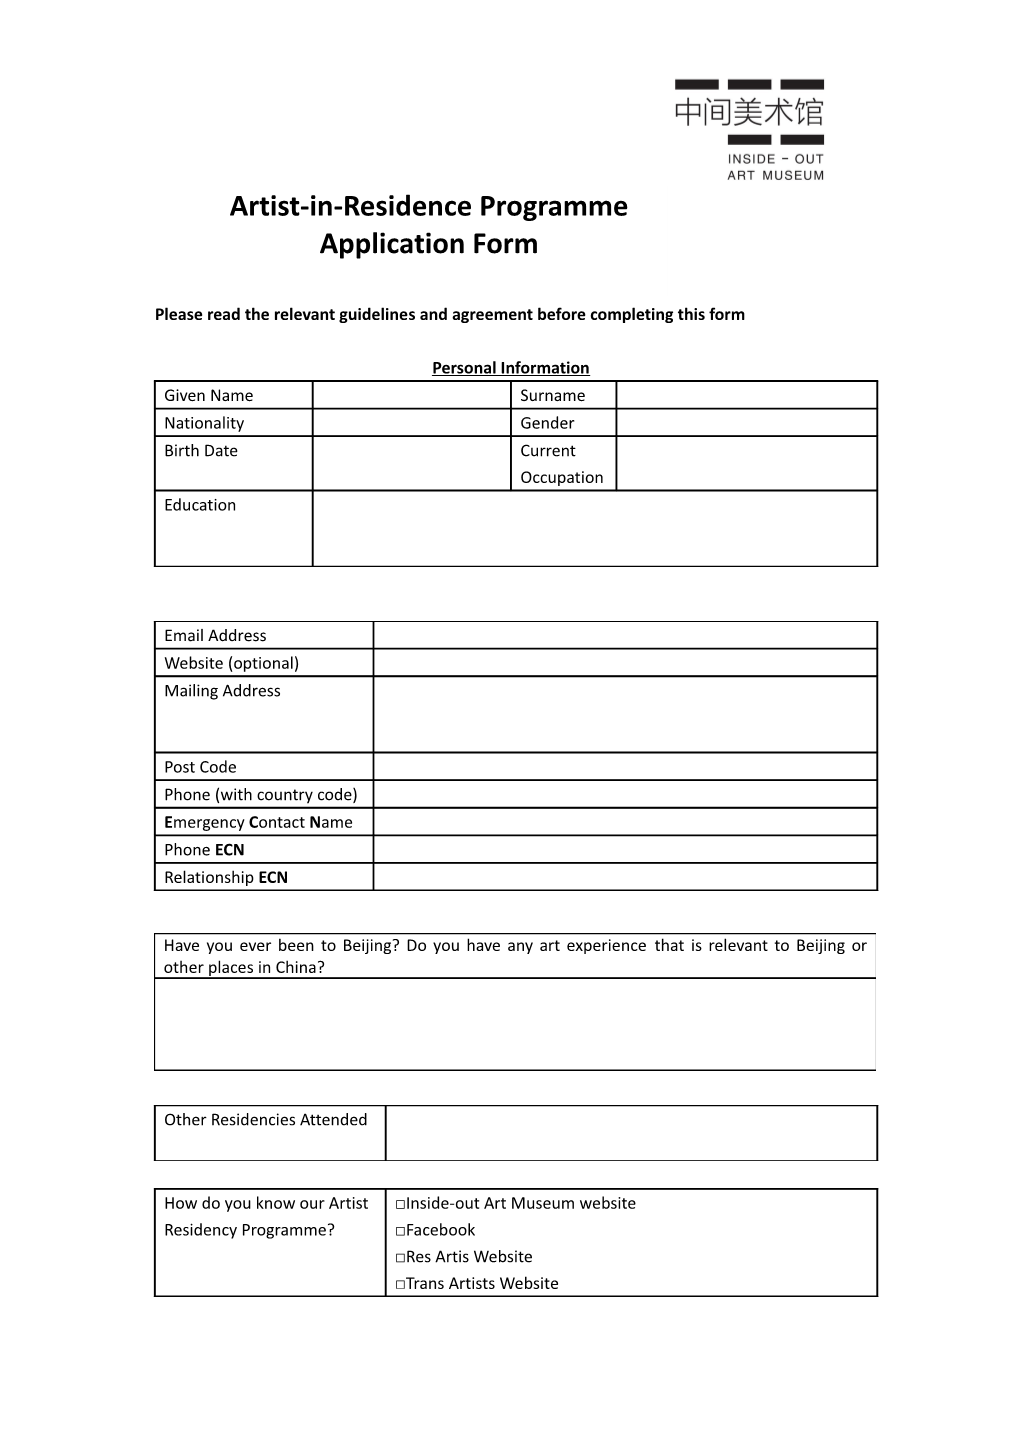 Please Read the Relevant Guidelinesand Agreement Before Completing This Form